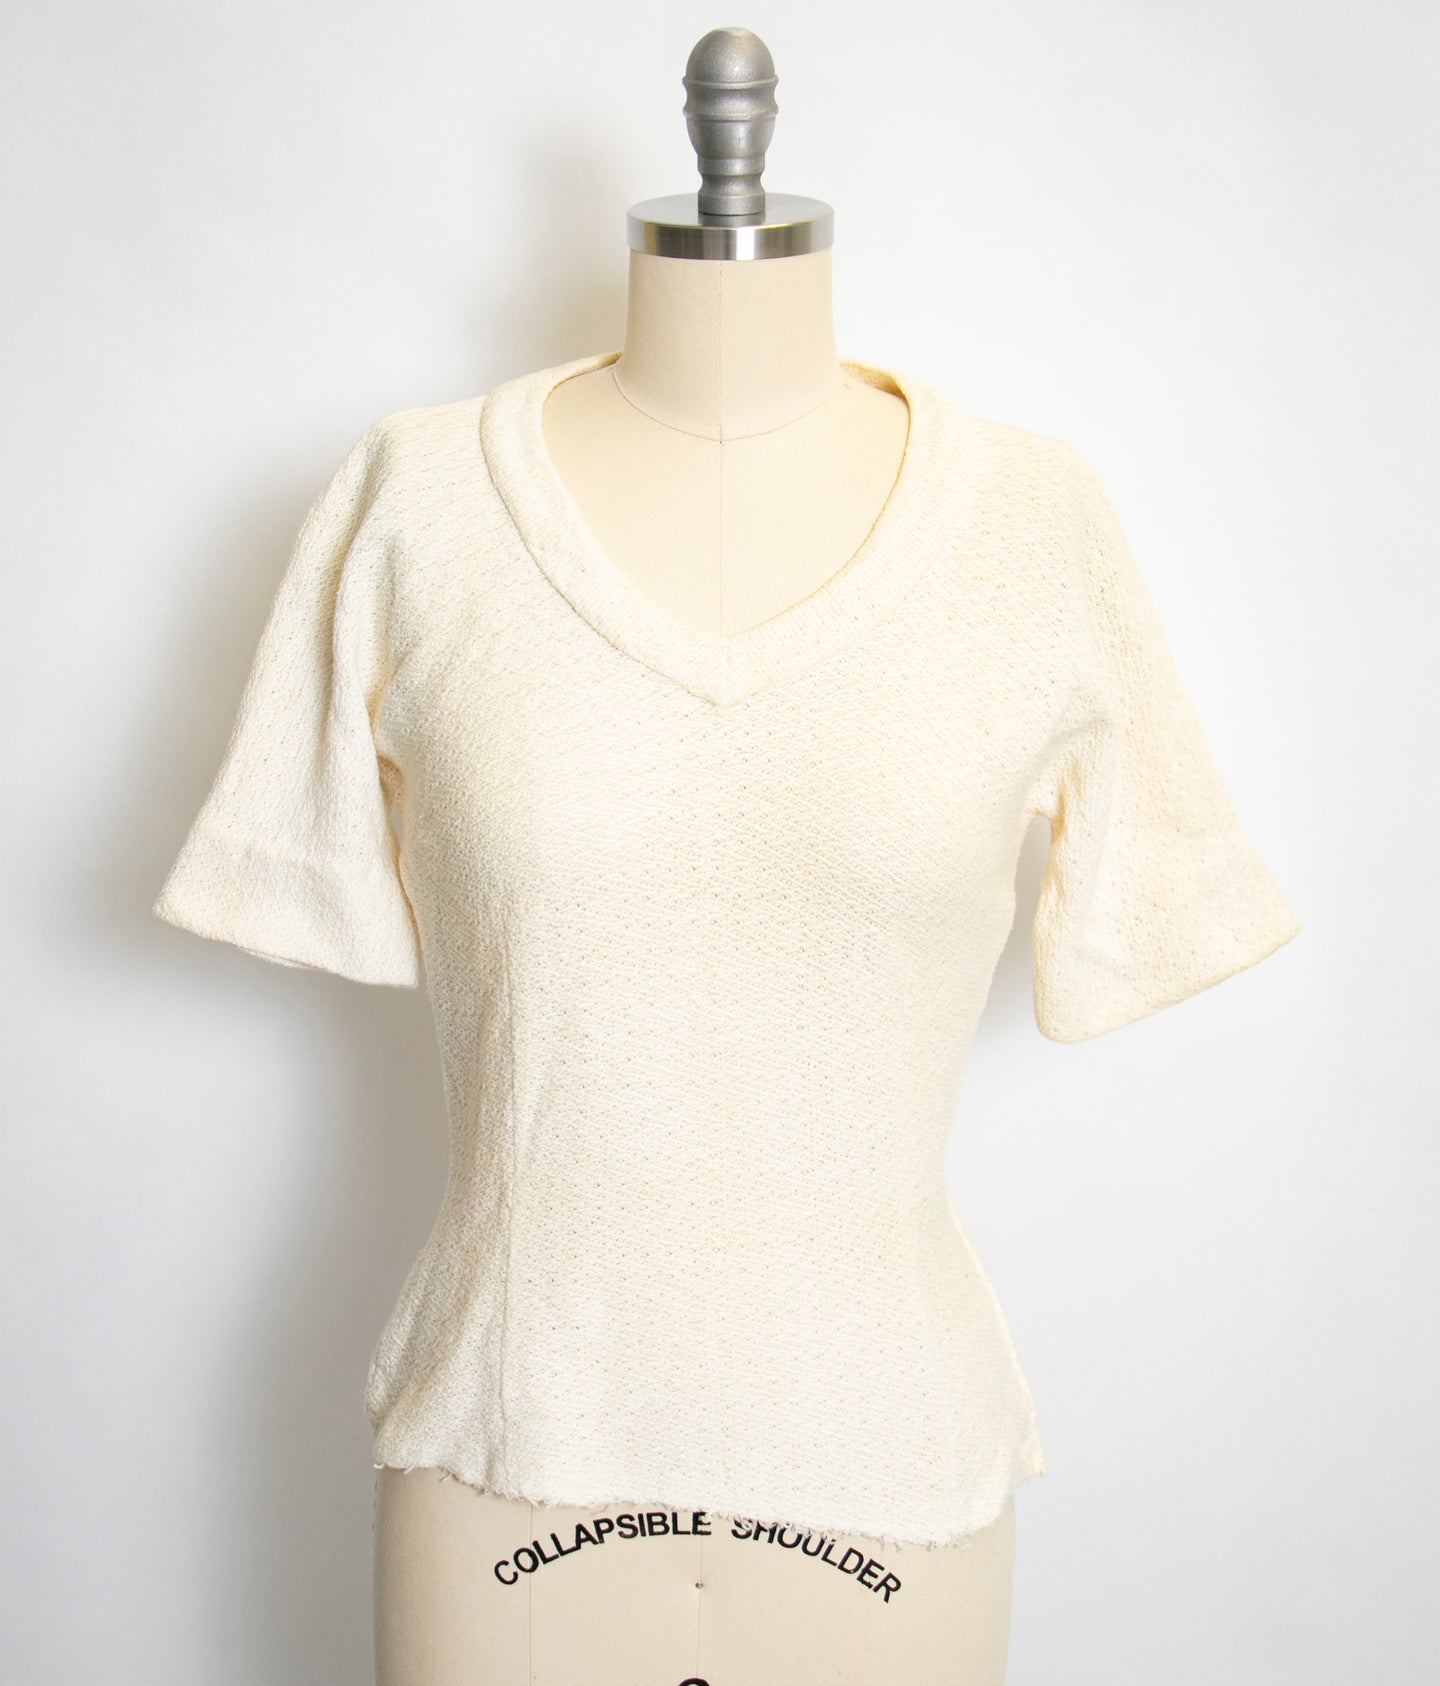 1950s Knit Top Cream Fitted Blouse Small